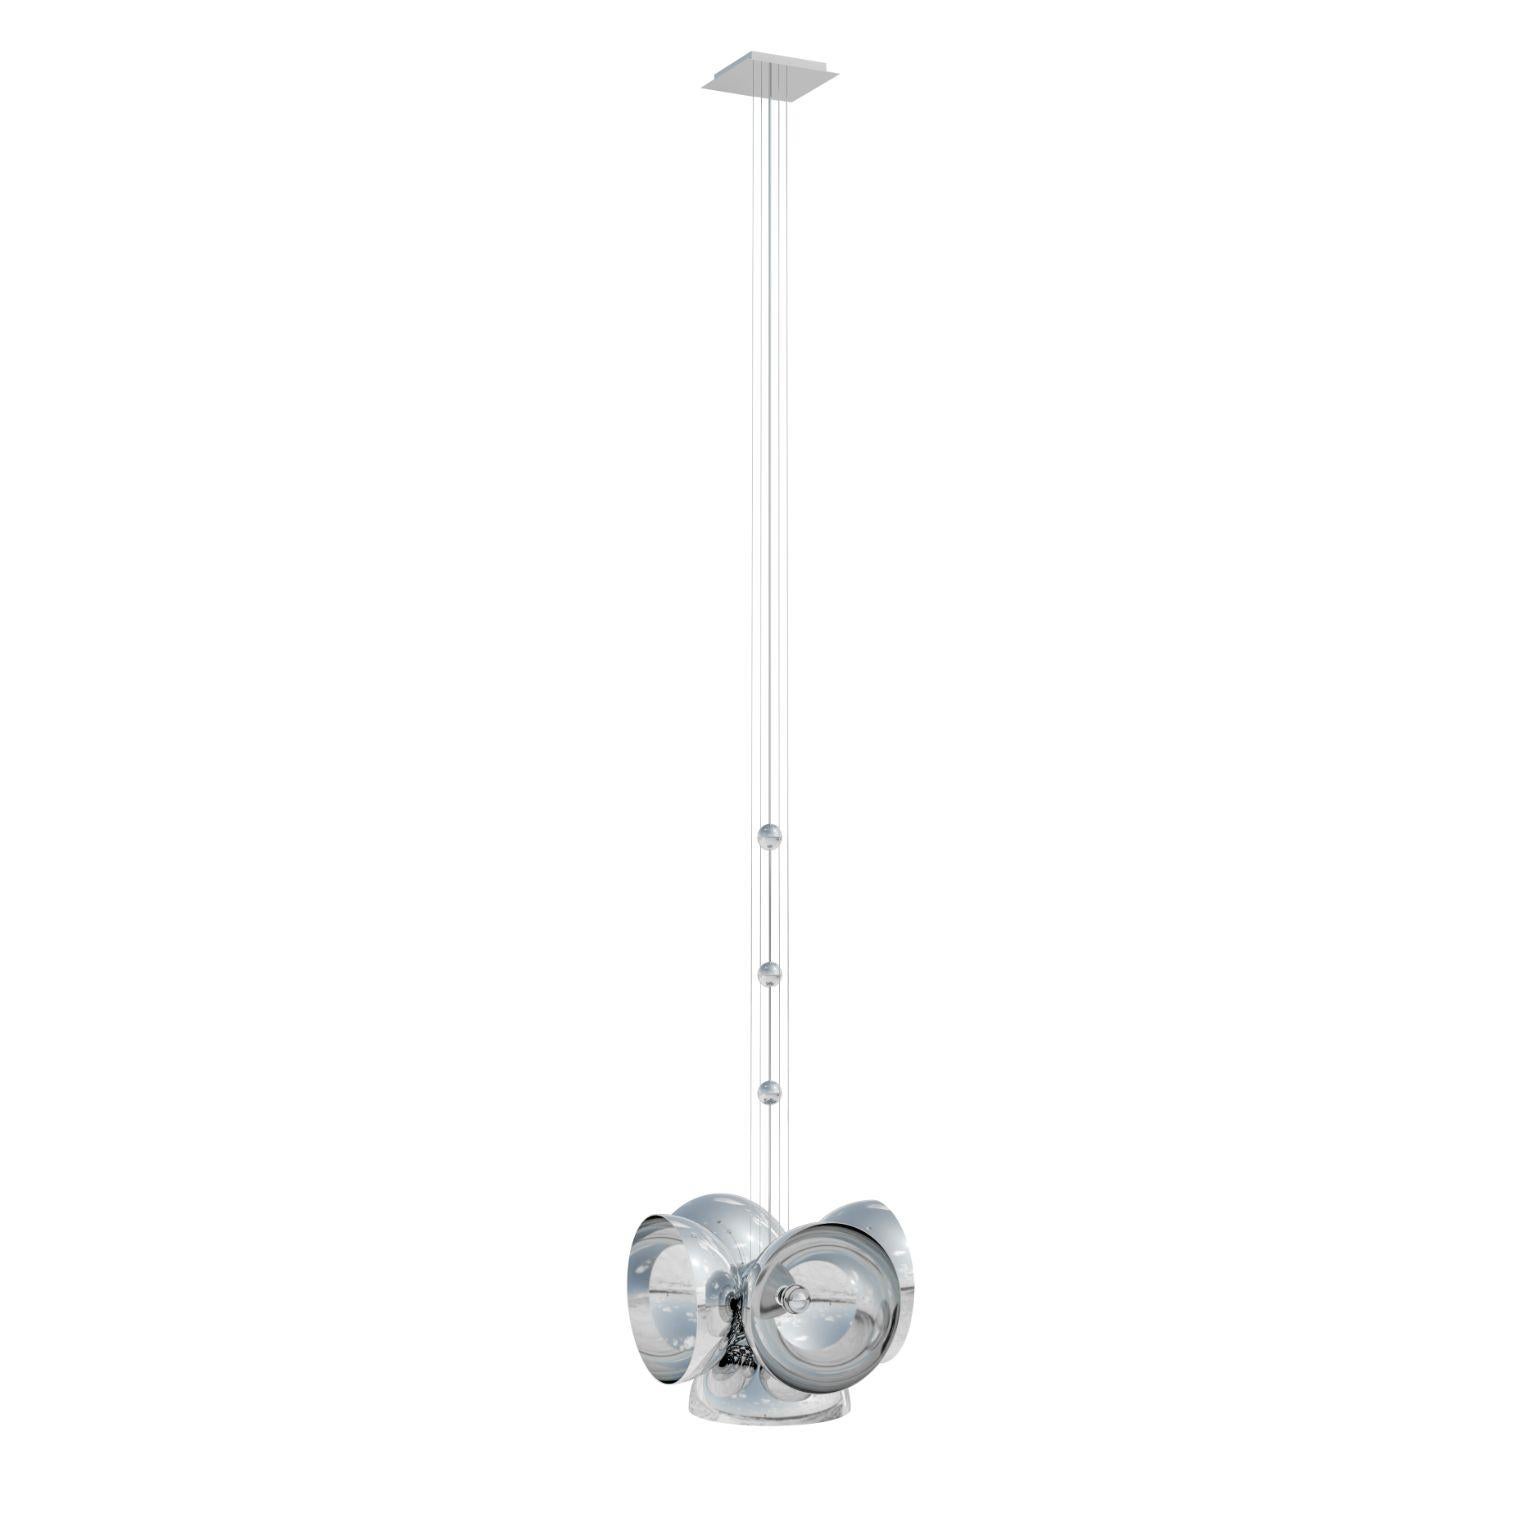 Relic Aureole 1 pendant by The Shaw
Dimensions: D50 x W 43 x H 350 cm
Materials: Stainless Steel
Weight: 18 kg

All our lamps can be wired according to each country. If sold to the USA it will be wired for the USA for instance.

R E L I C A U